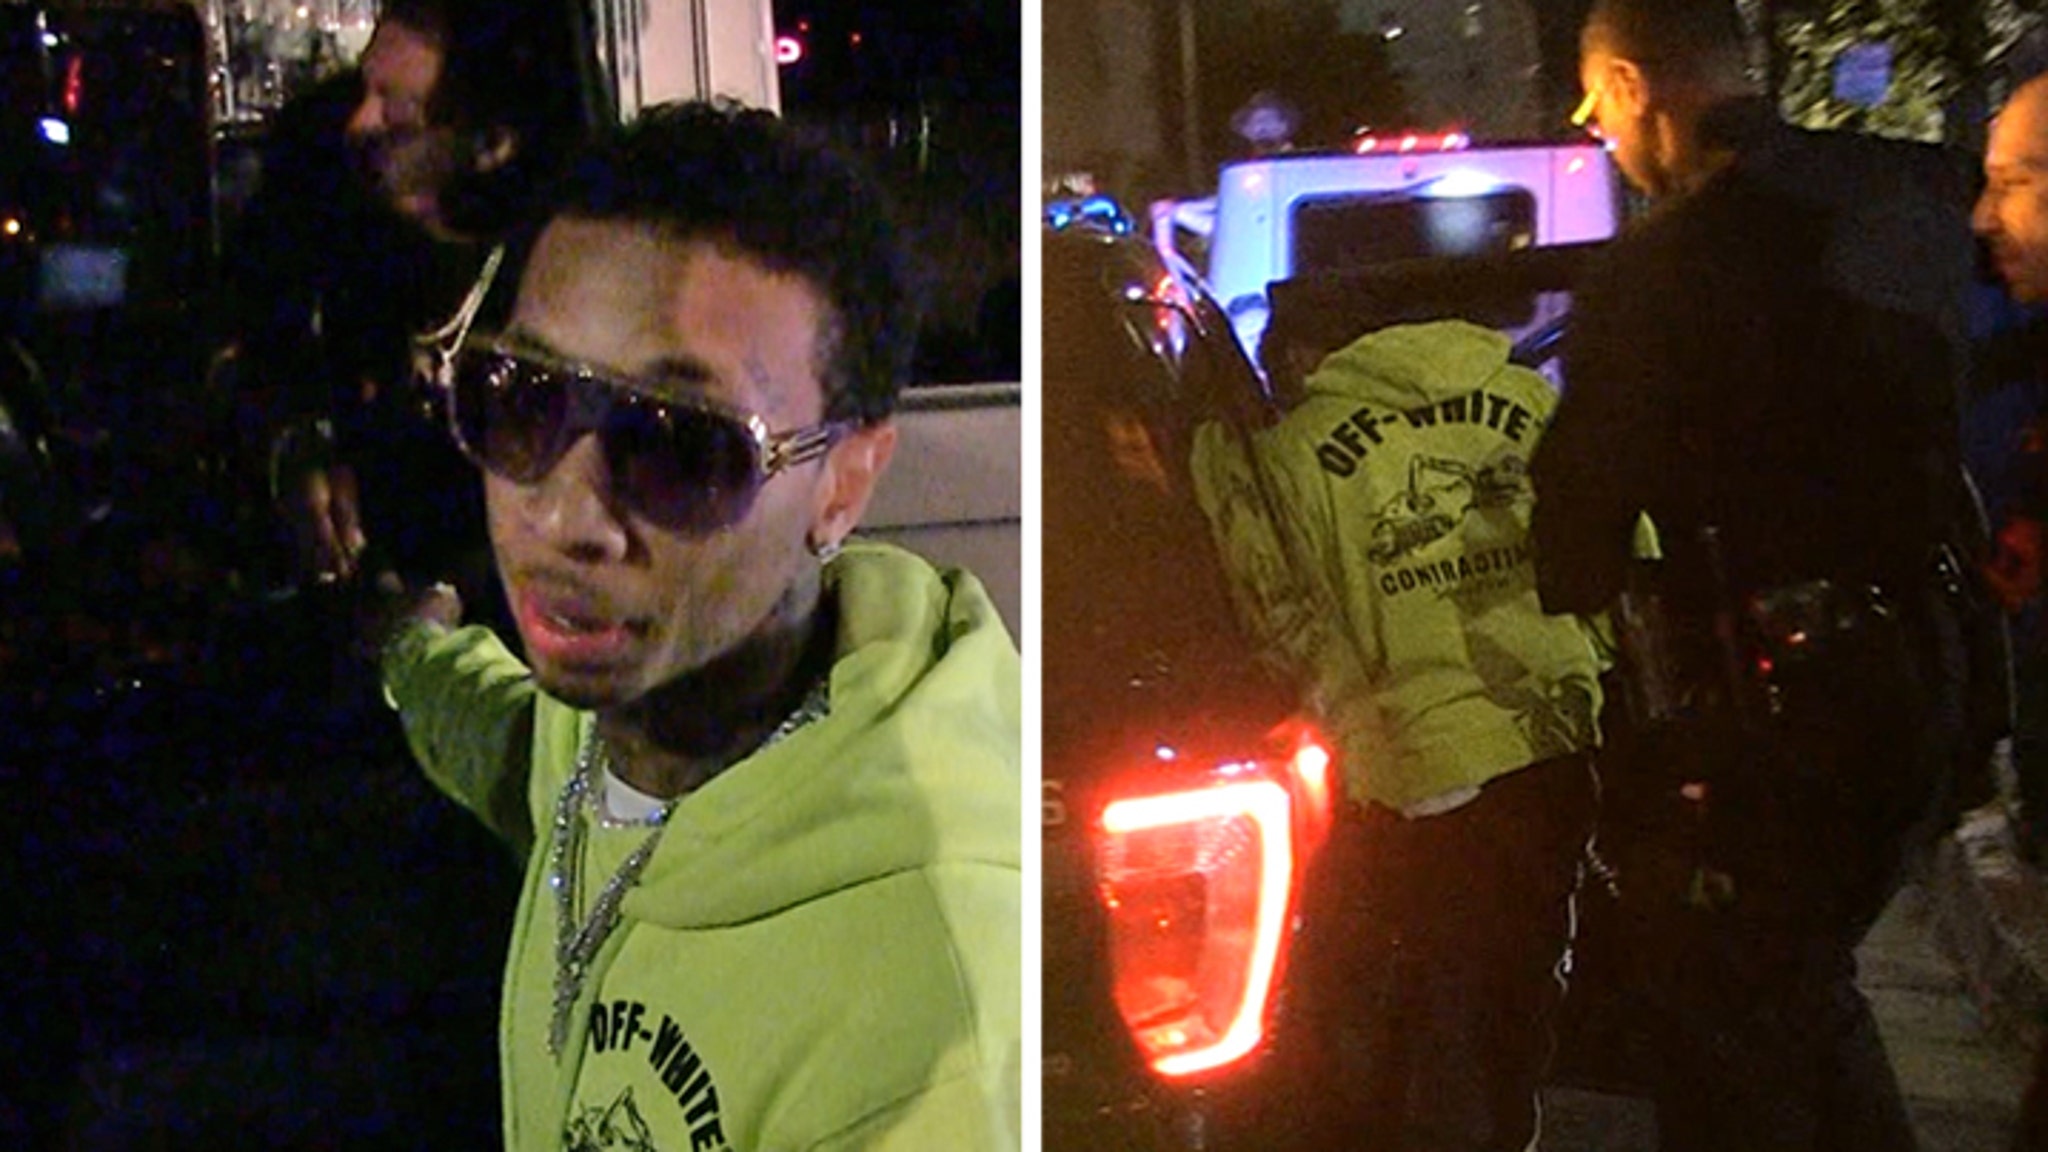 Tyga Investigated for DUI, Gets Off with a Ticket